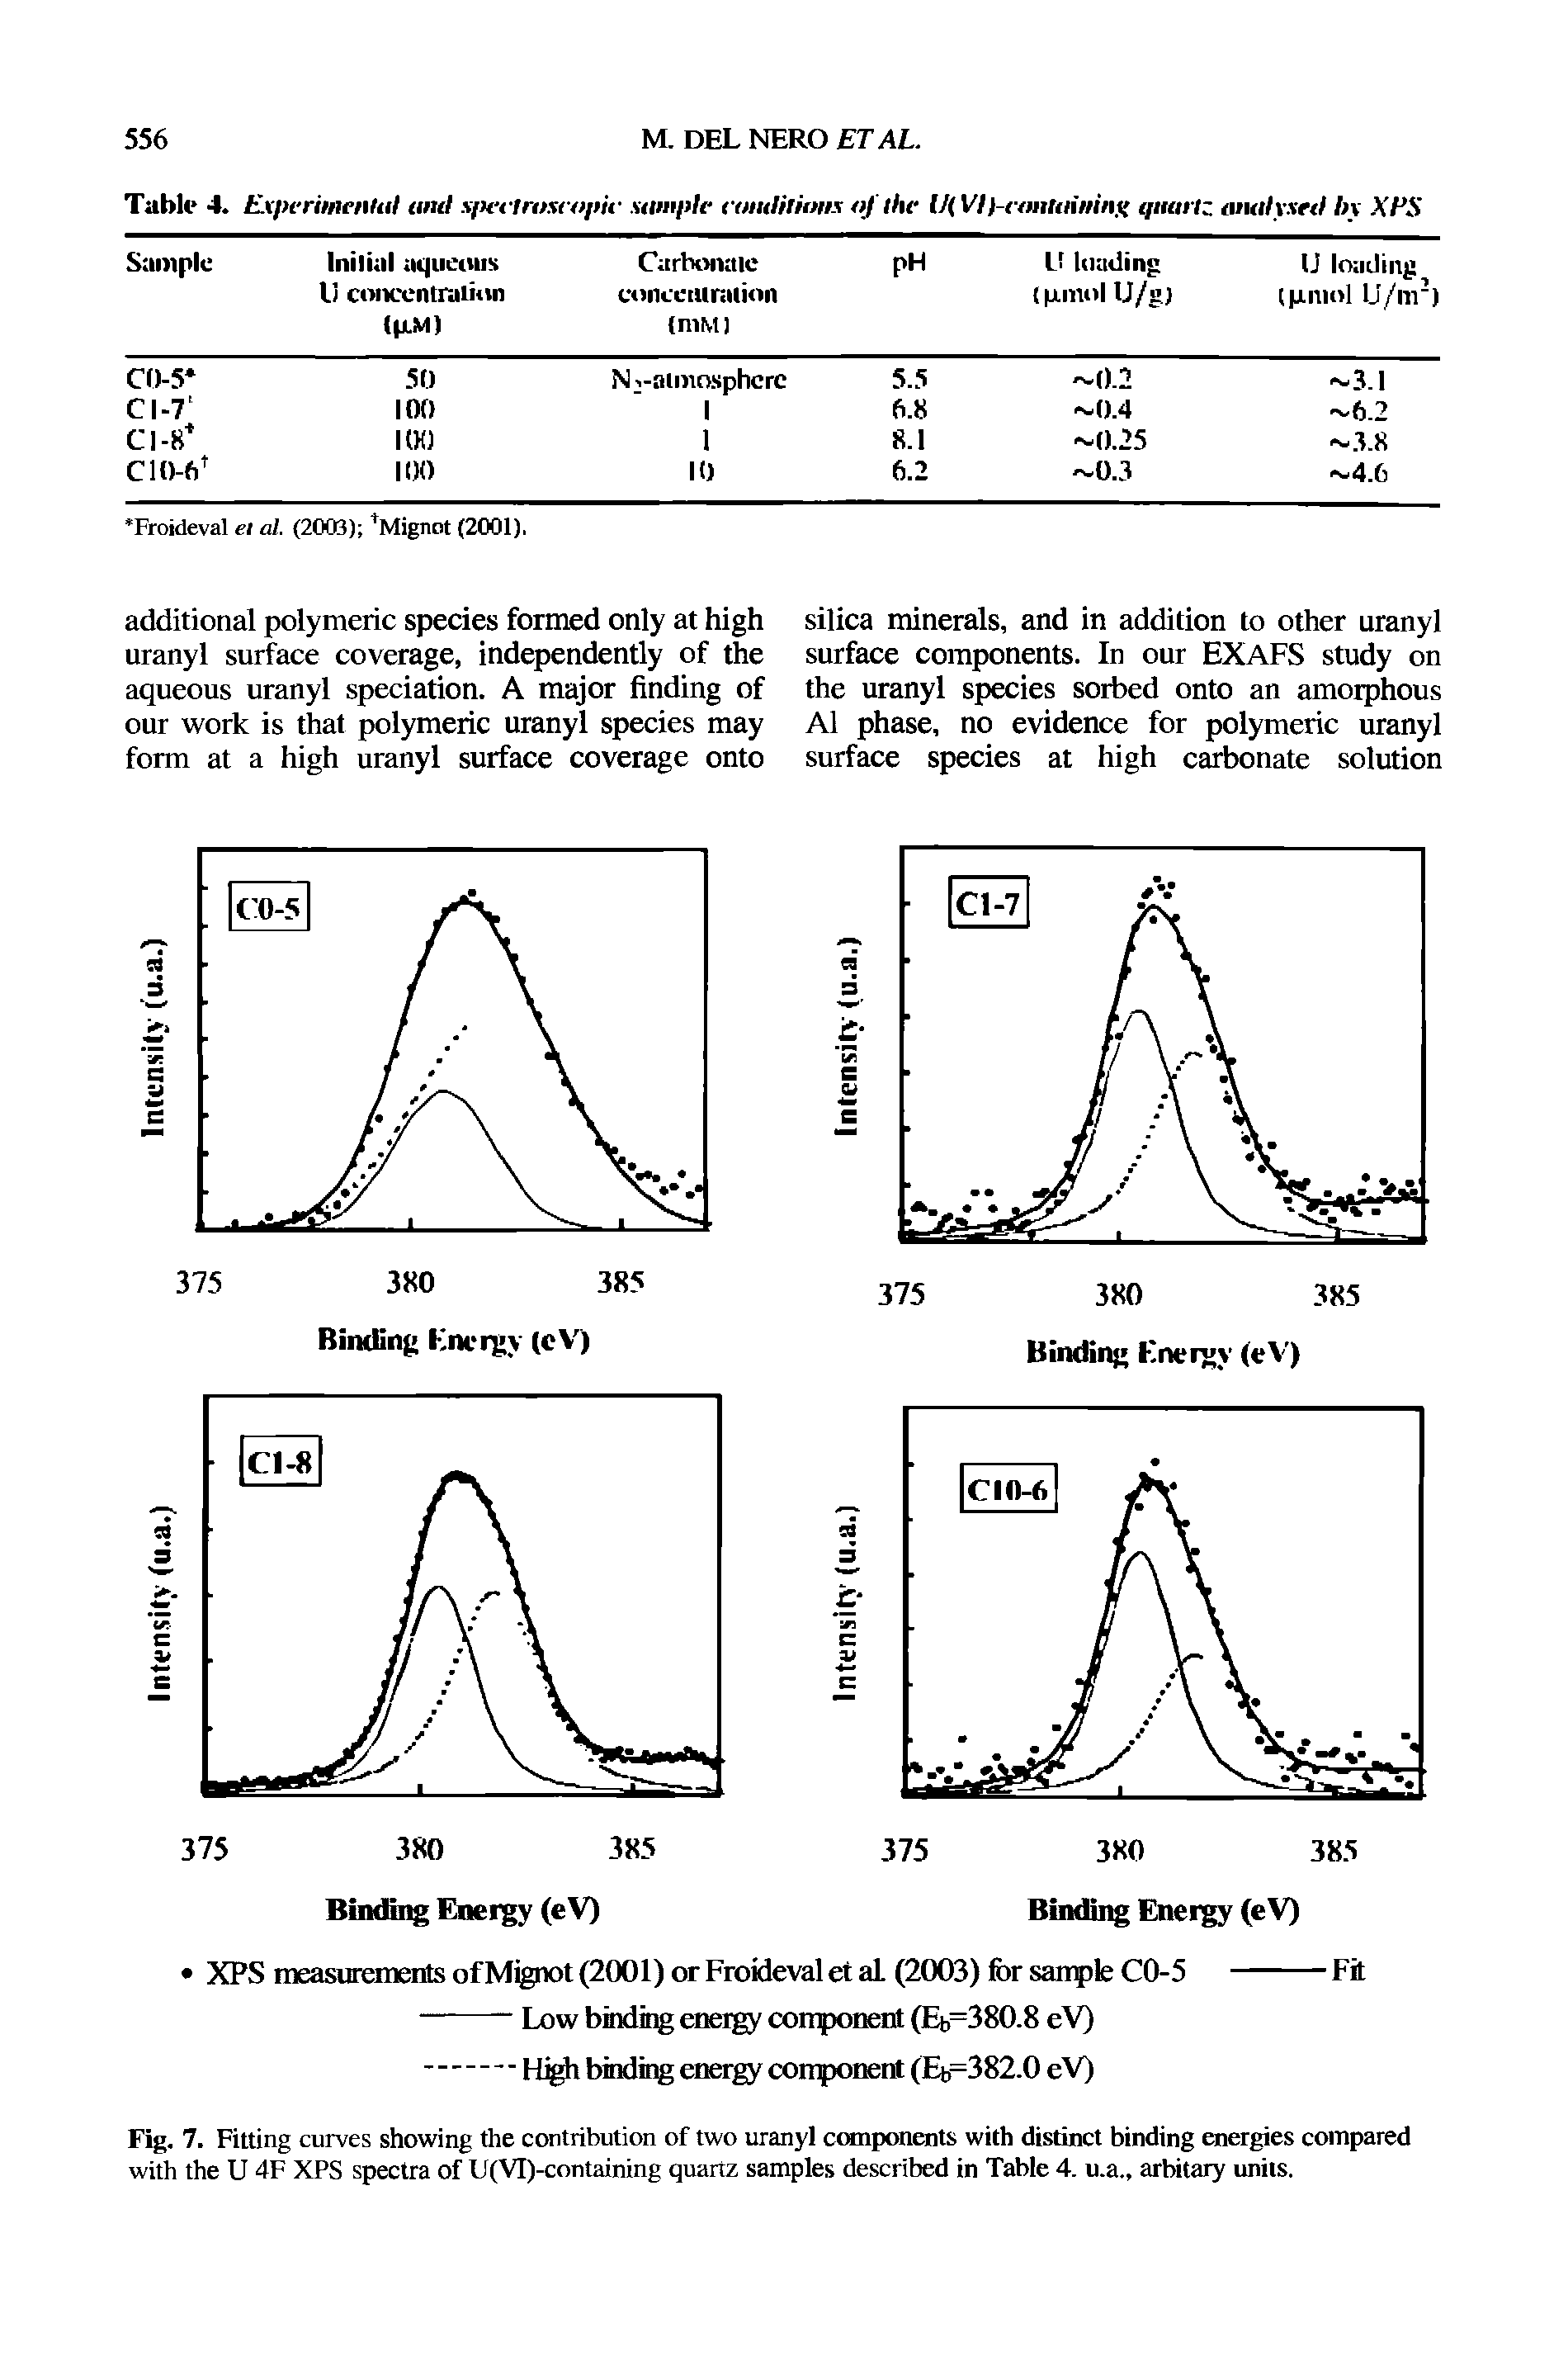 Fig. 7. Fitting curves showing the contribution of two uranyl components with distinct binding energies compared with the U 4F XPS spectra of U(VI)-containing quartz samples described in Table 4. u.a., arbitary units.